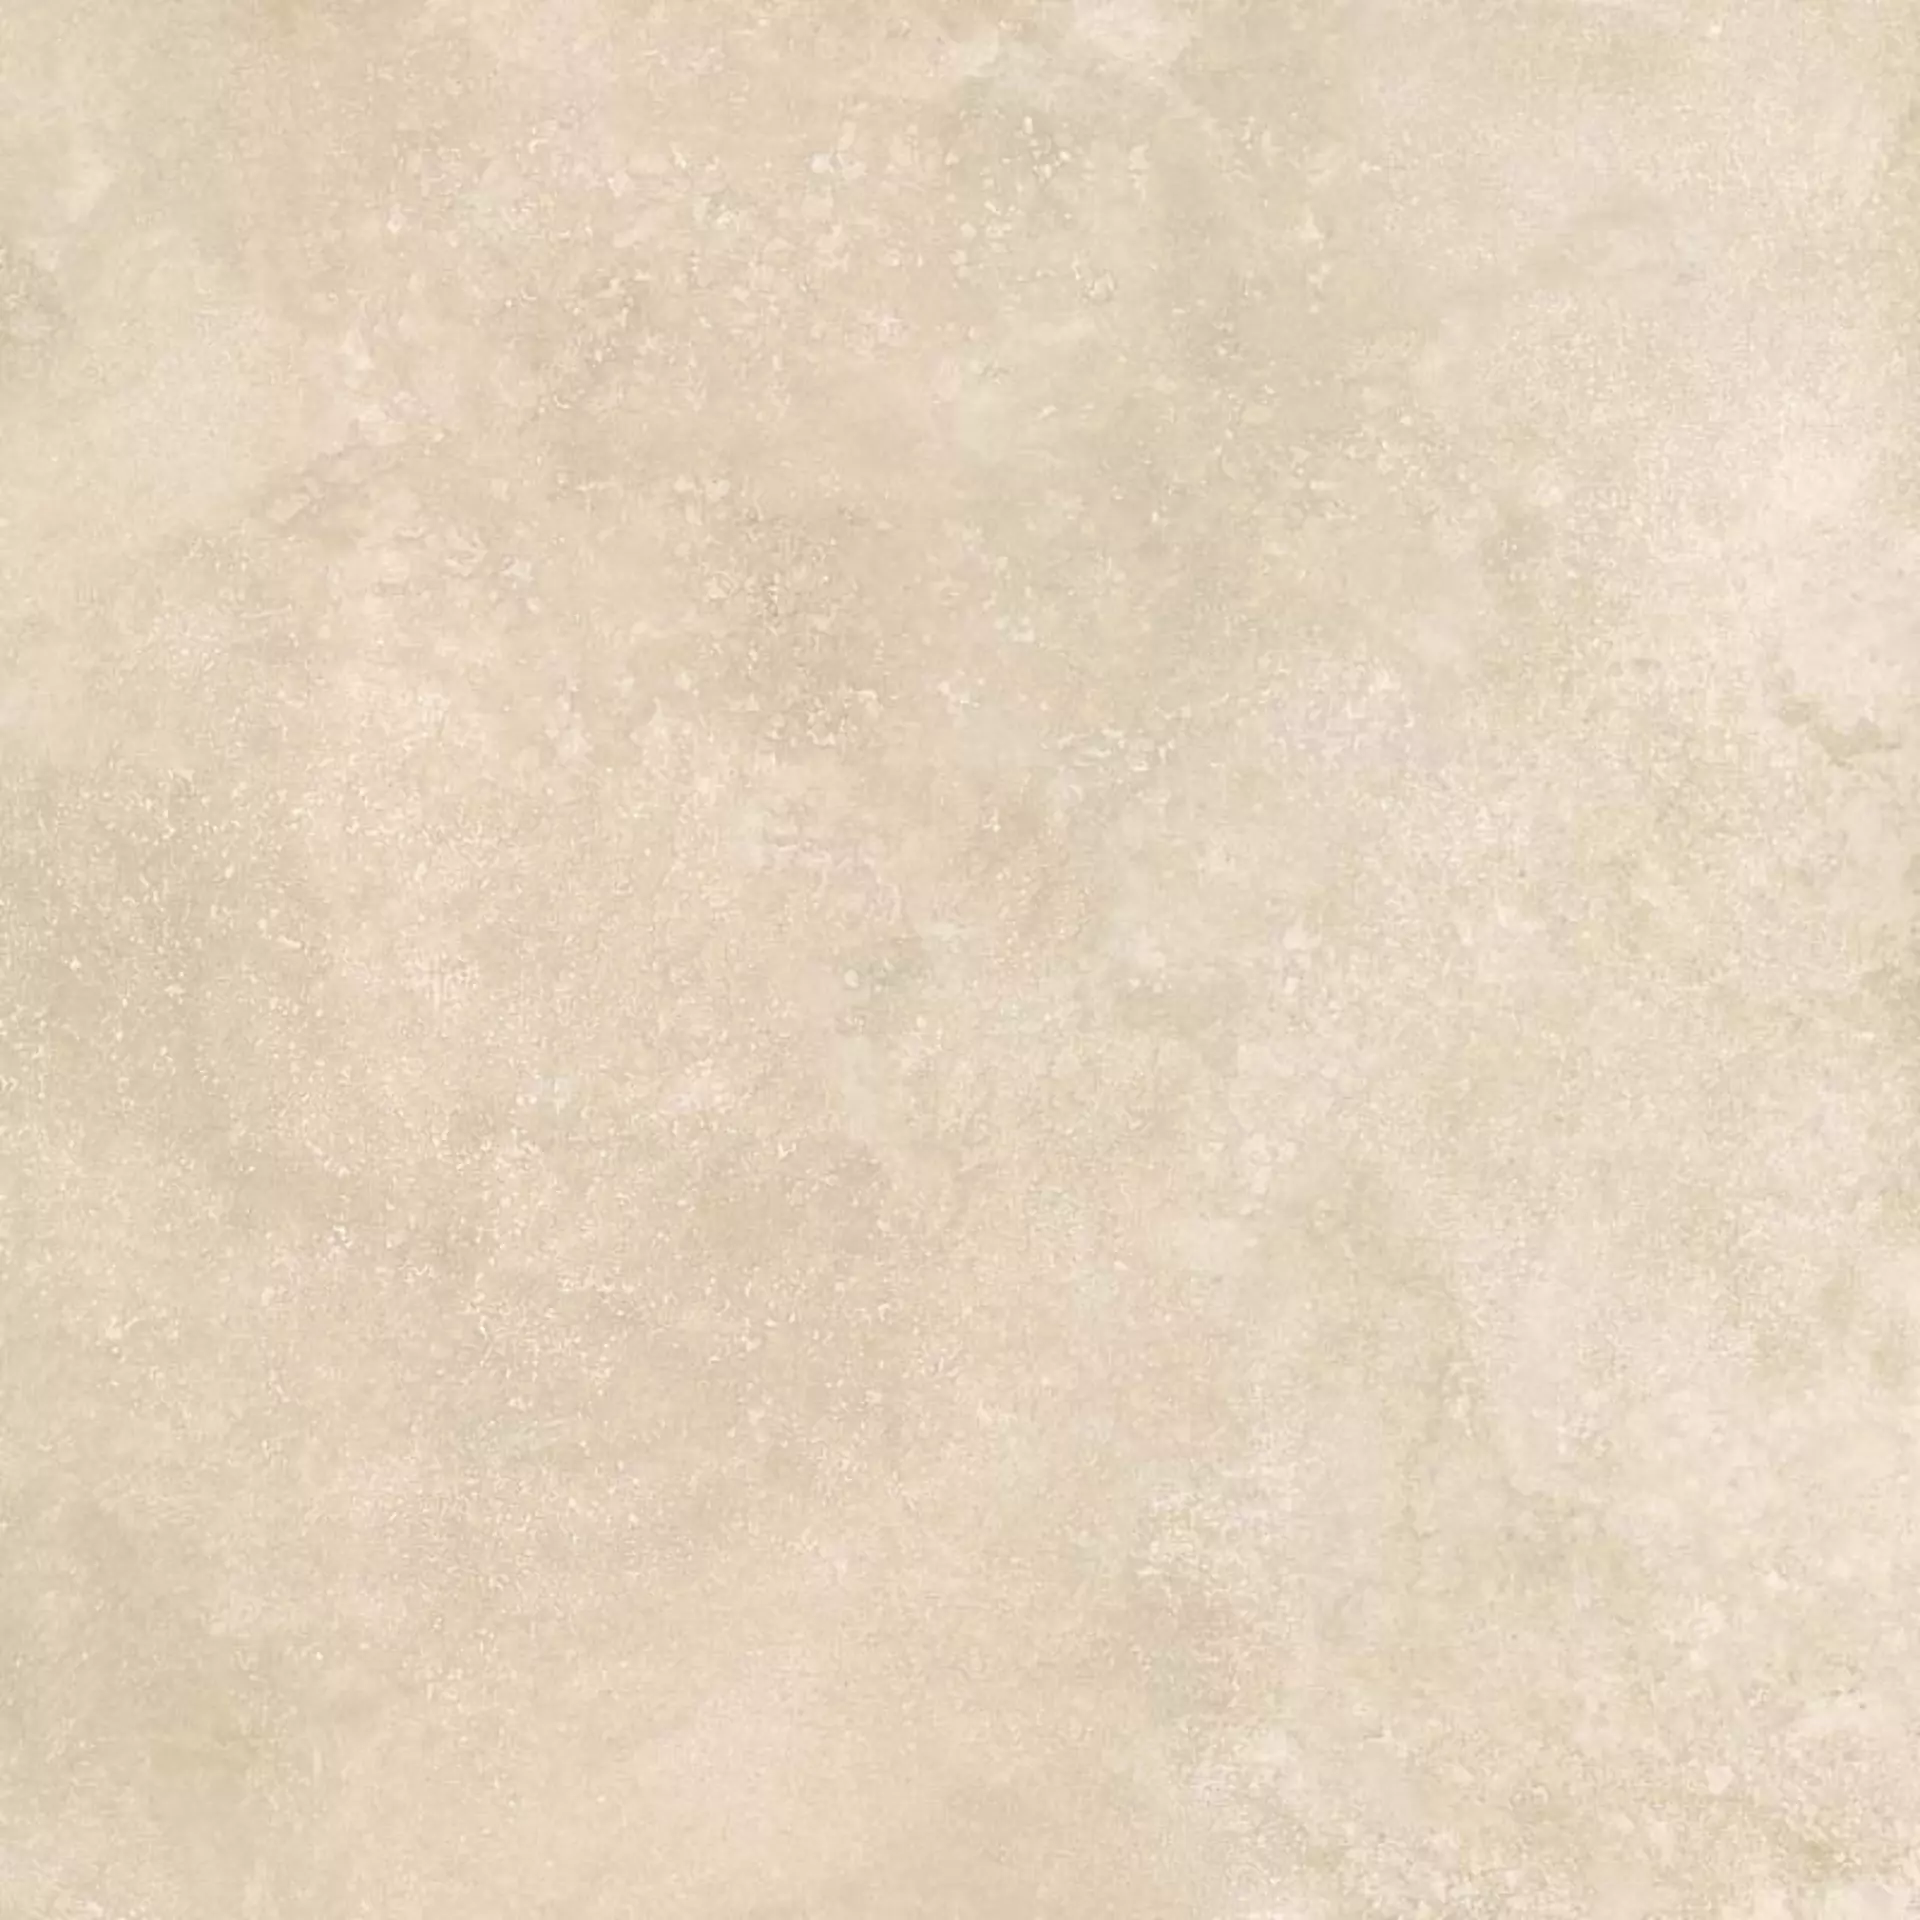 Sant Agostino Via Appia Beige Natural CSAACCBE12 120x120cm rectified 10mm